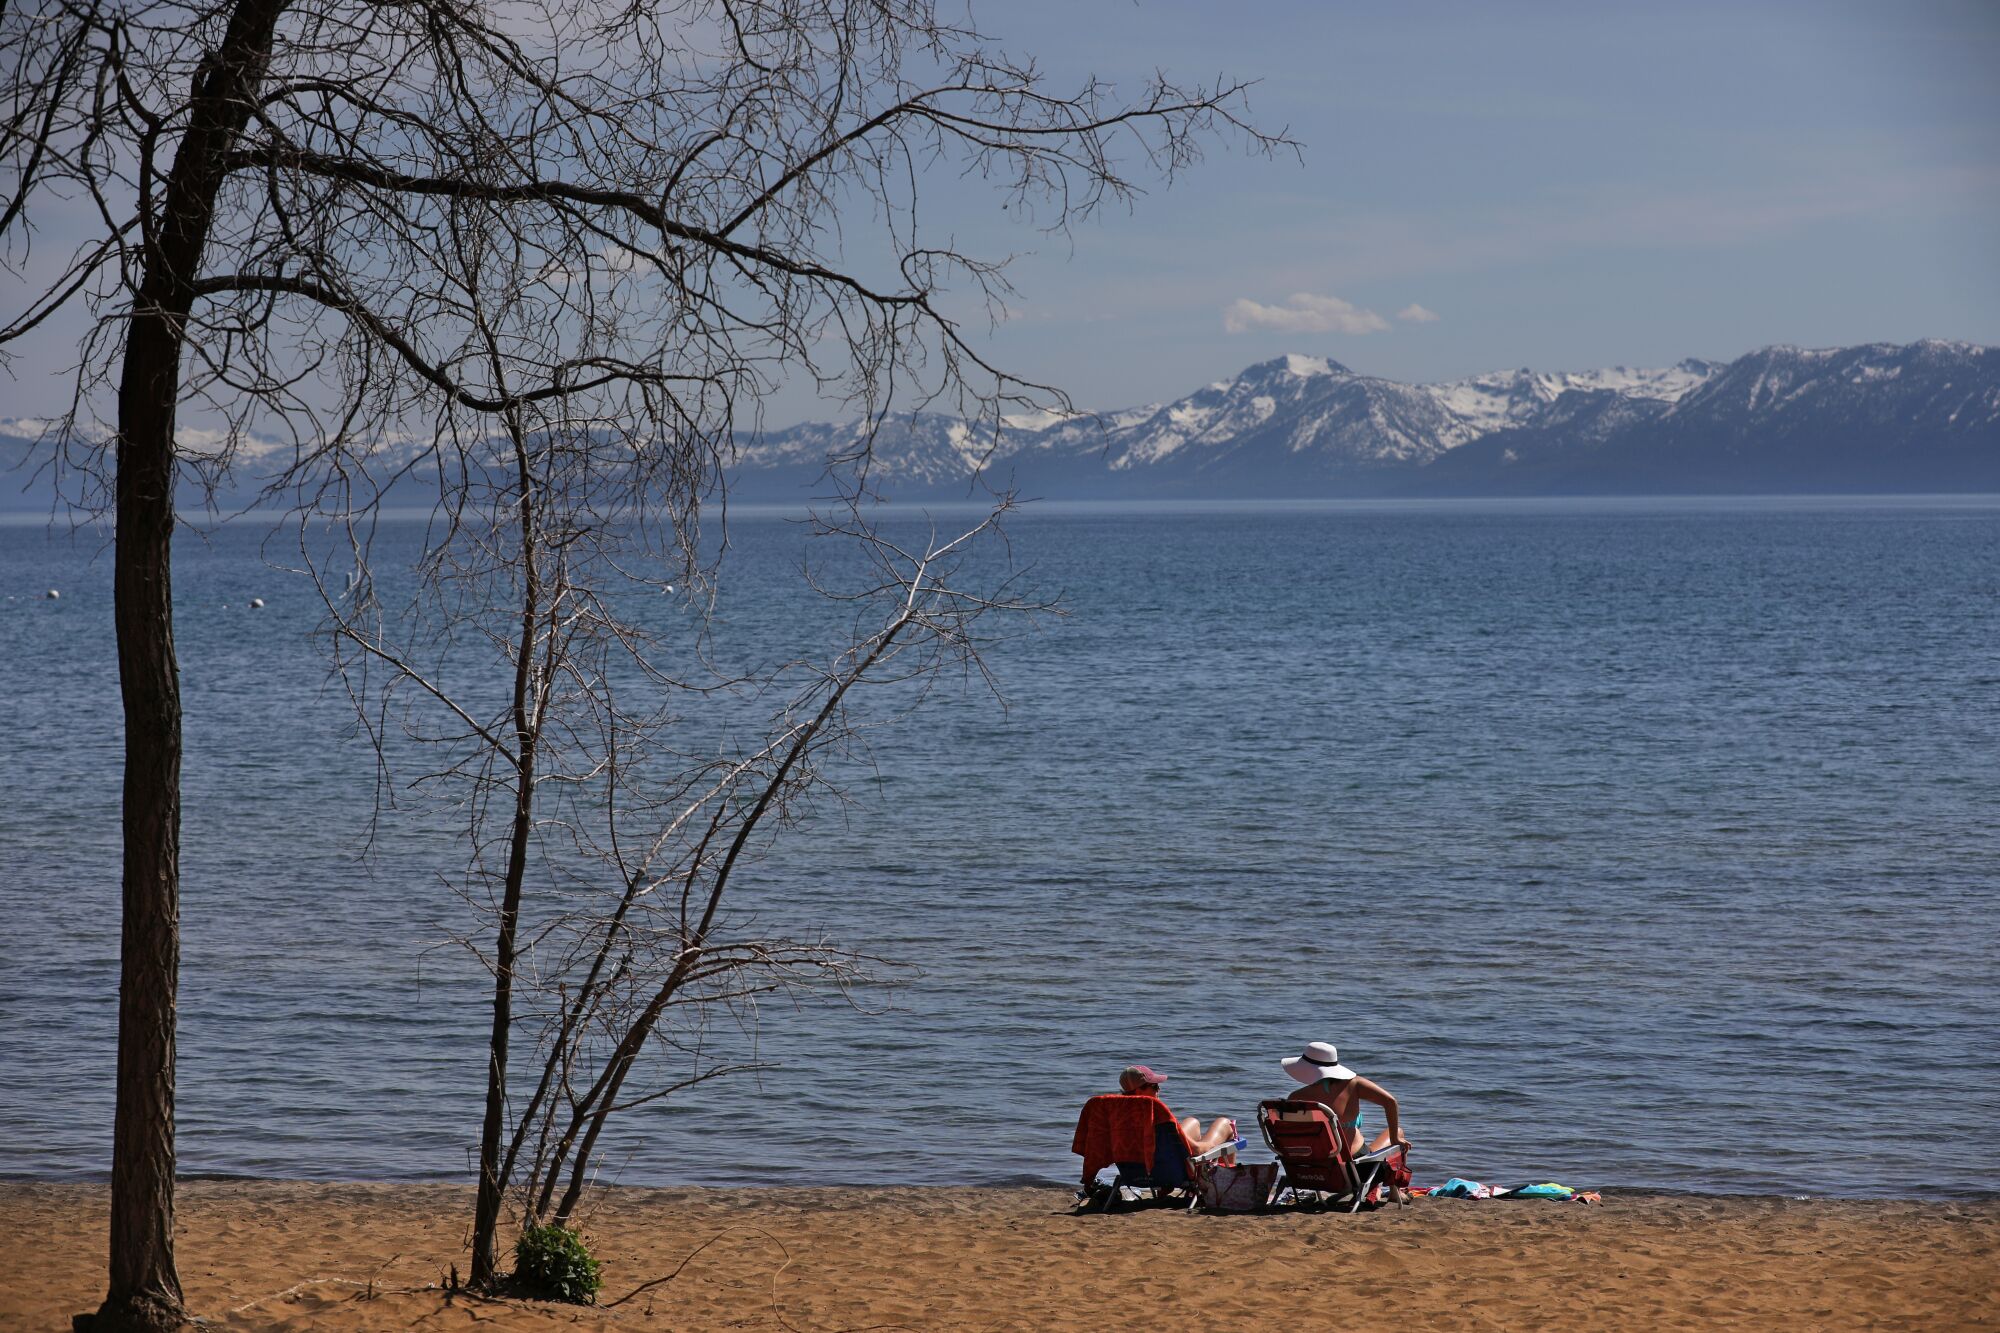 People take in the sun along an empty stretch of sand on the north shore of Lake Tahoe in Kings Beach